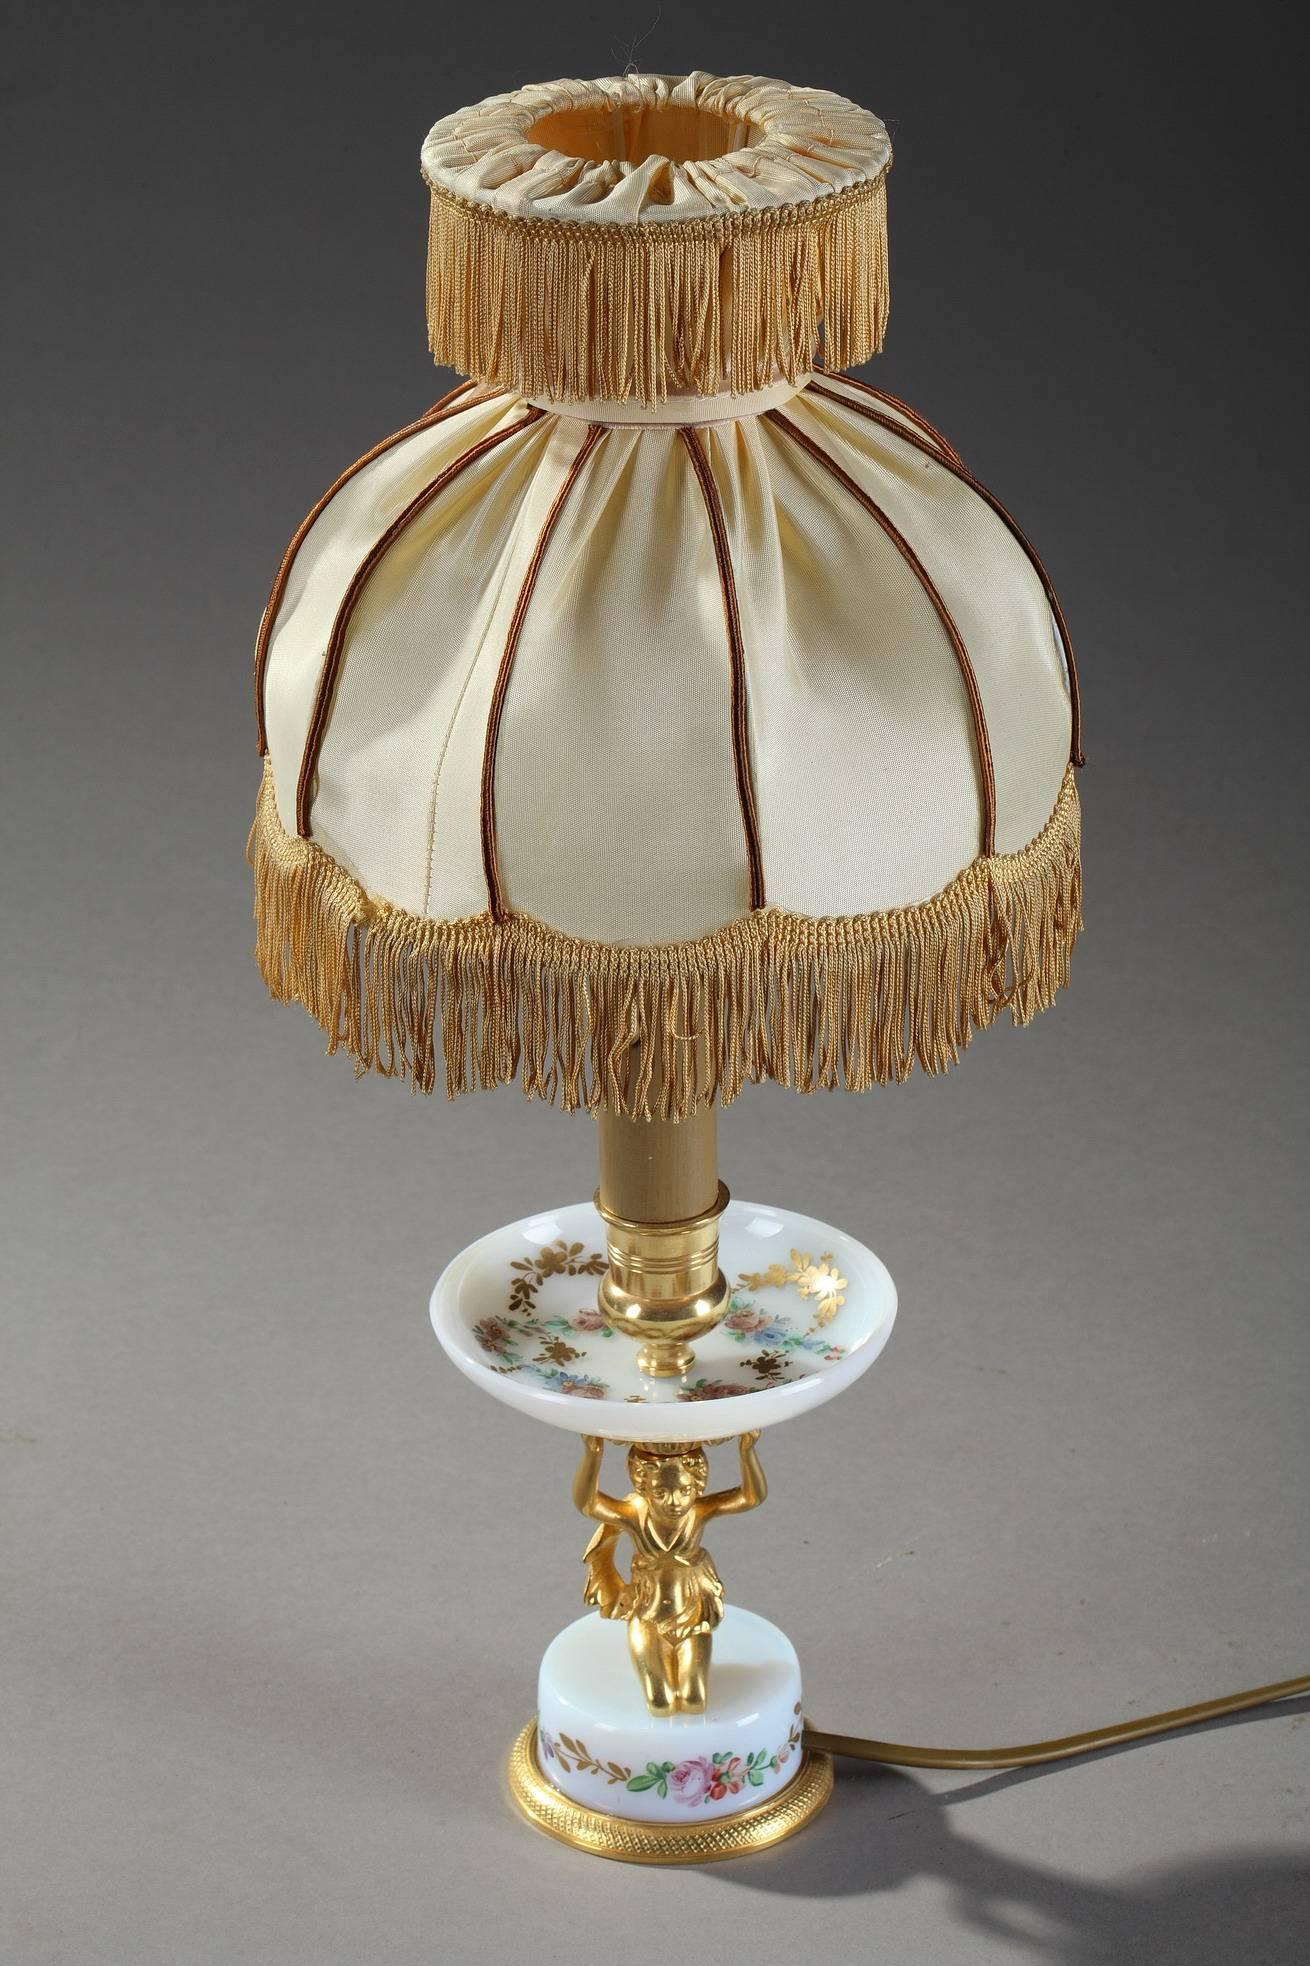 19th century table lamp featuring a gilt bronze putto knelt down on a small opaline base decorated with polychromatic flowers. He is holding an opaline cup above his head in his upraised arms. The cup is highlighted with polychromatic and gold